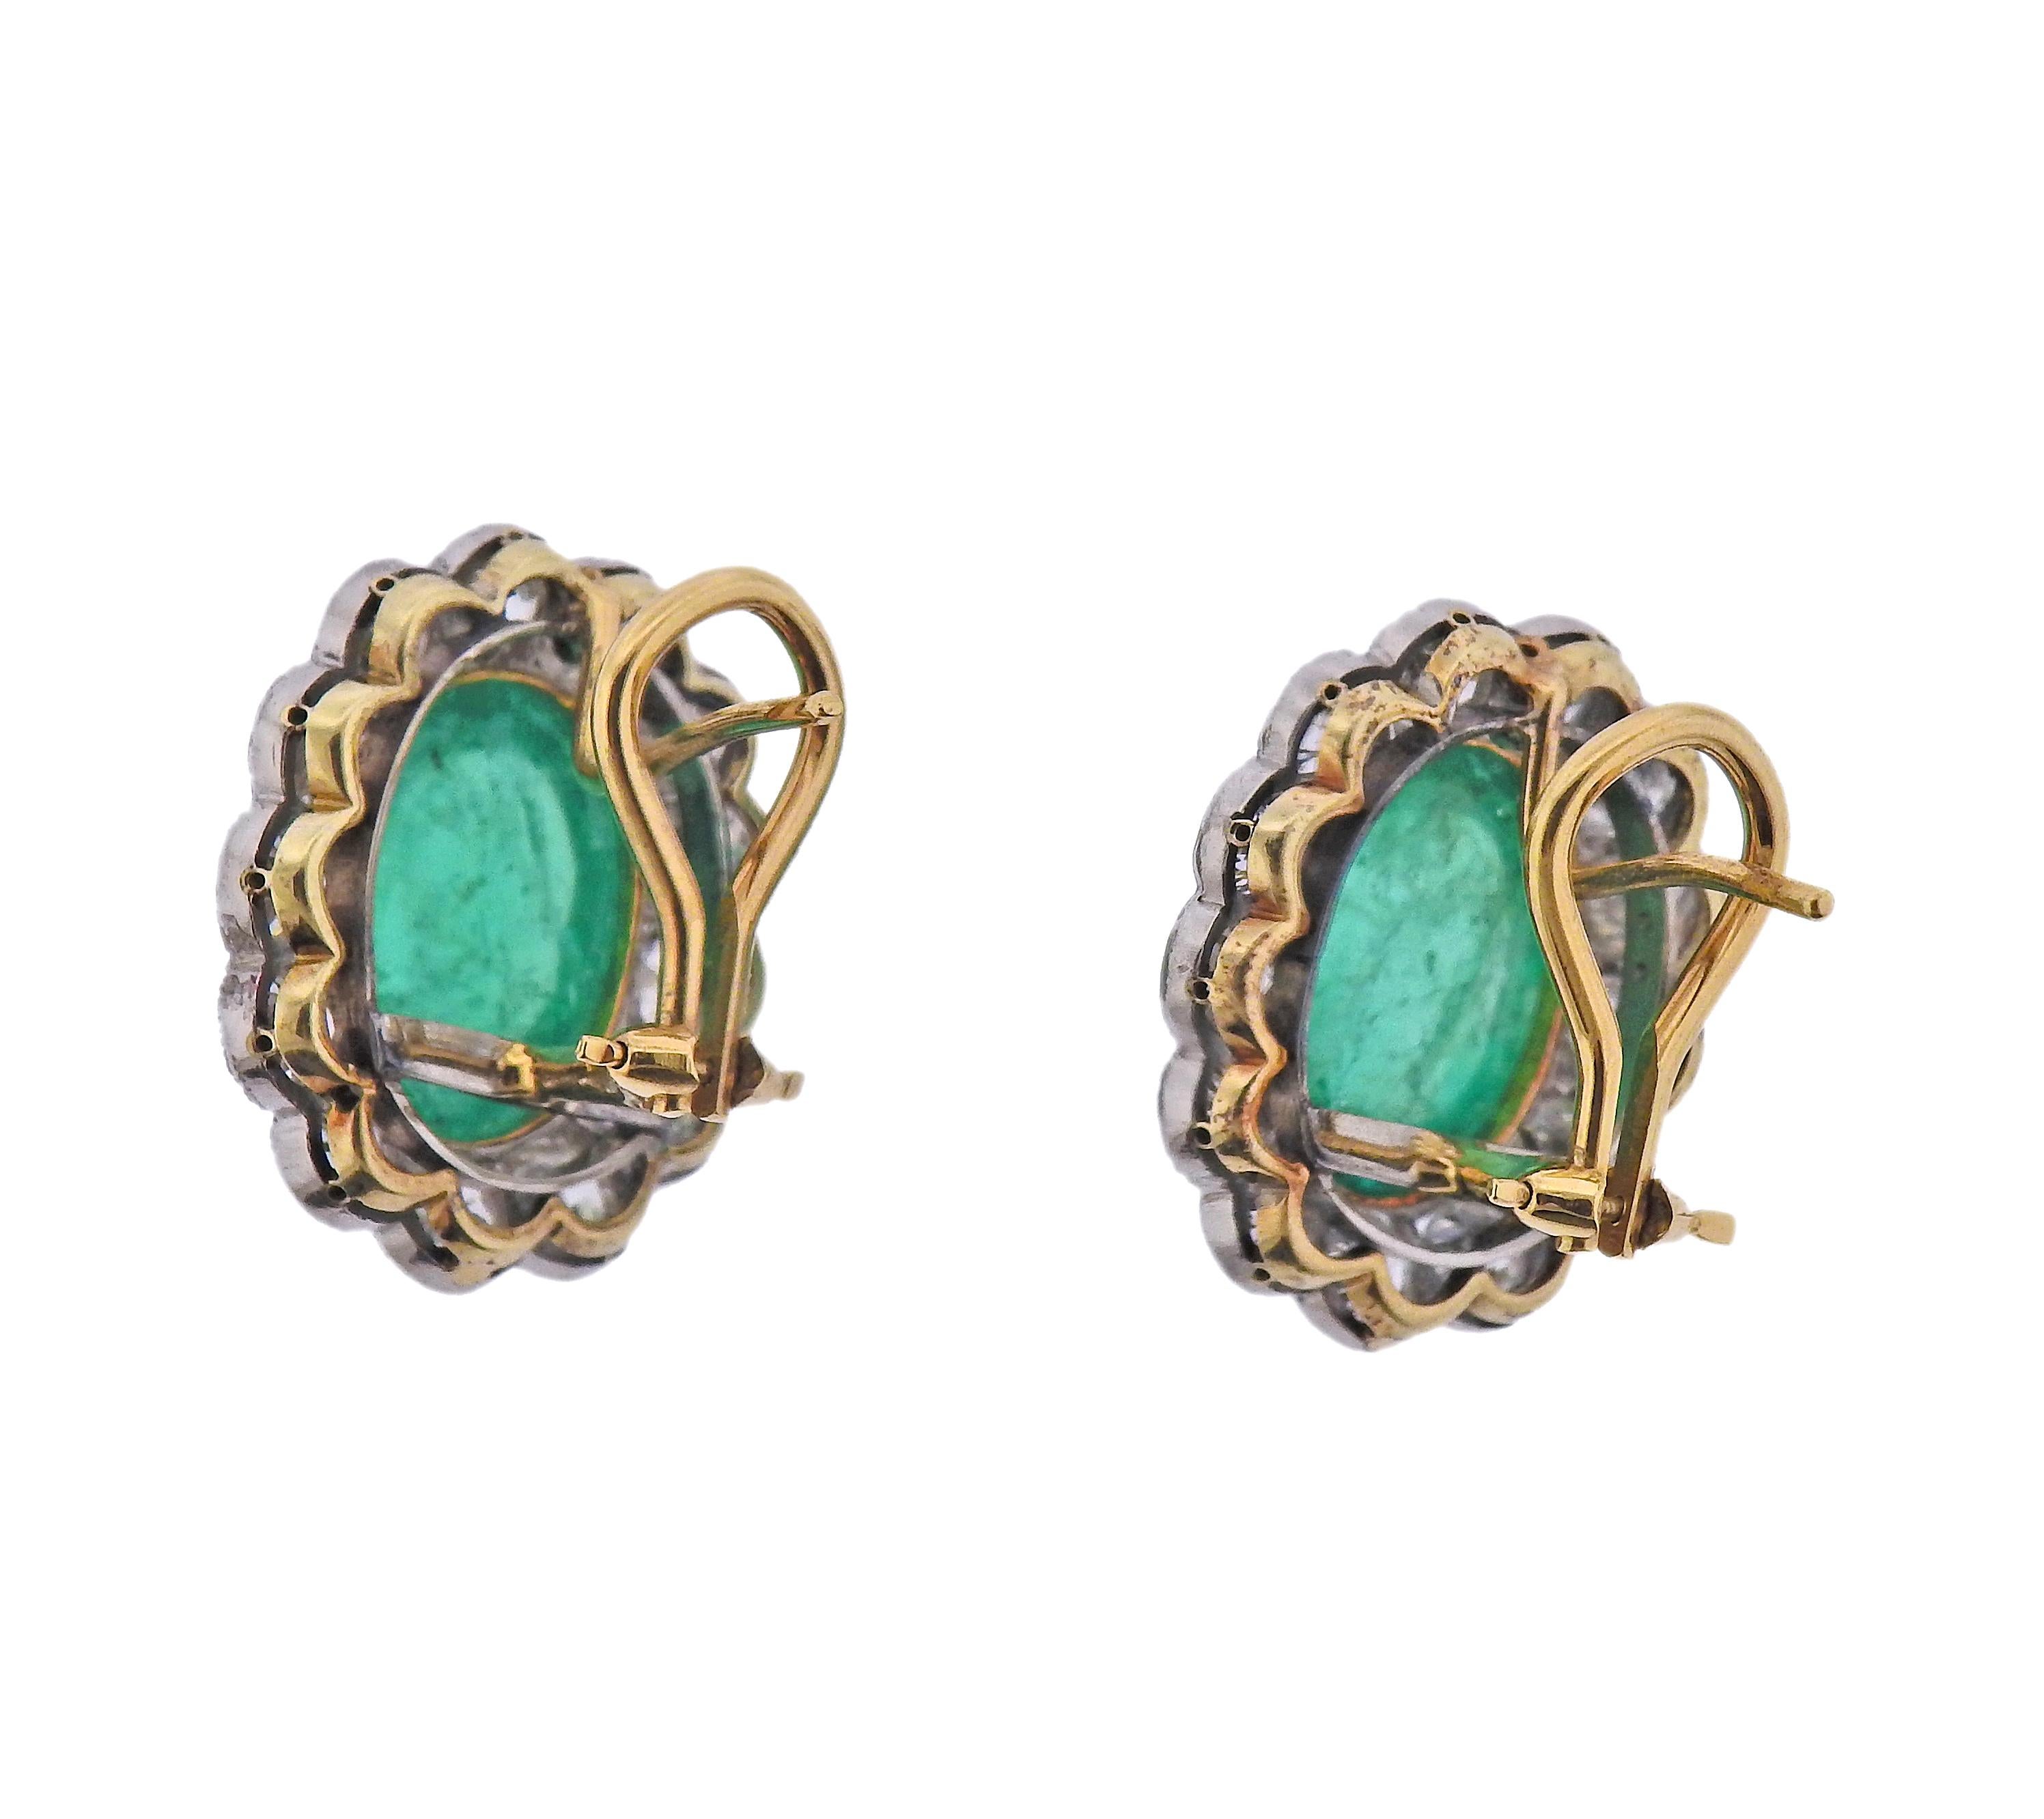 Pair of Antique Edwardian era, circa 1910 18k gold earrings, with center oval emerald cabochons - total approx. 12cts for both stones, Each stone measures approx. 12.5 x 9.8 x  6.2mm. Diamonds approx. 5.20ctw in old mine cut diamonds. Brooch is 21mm